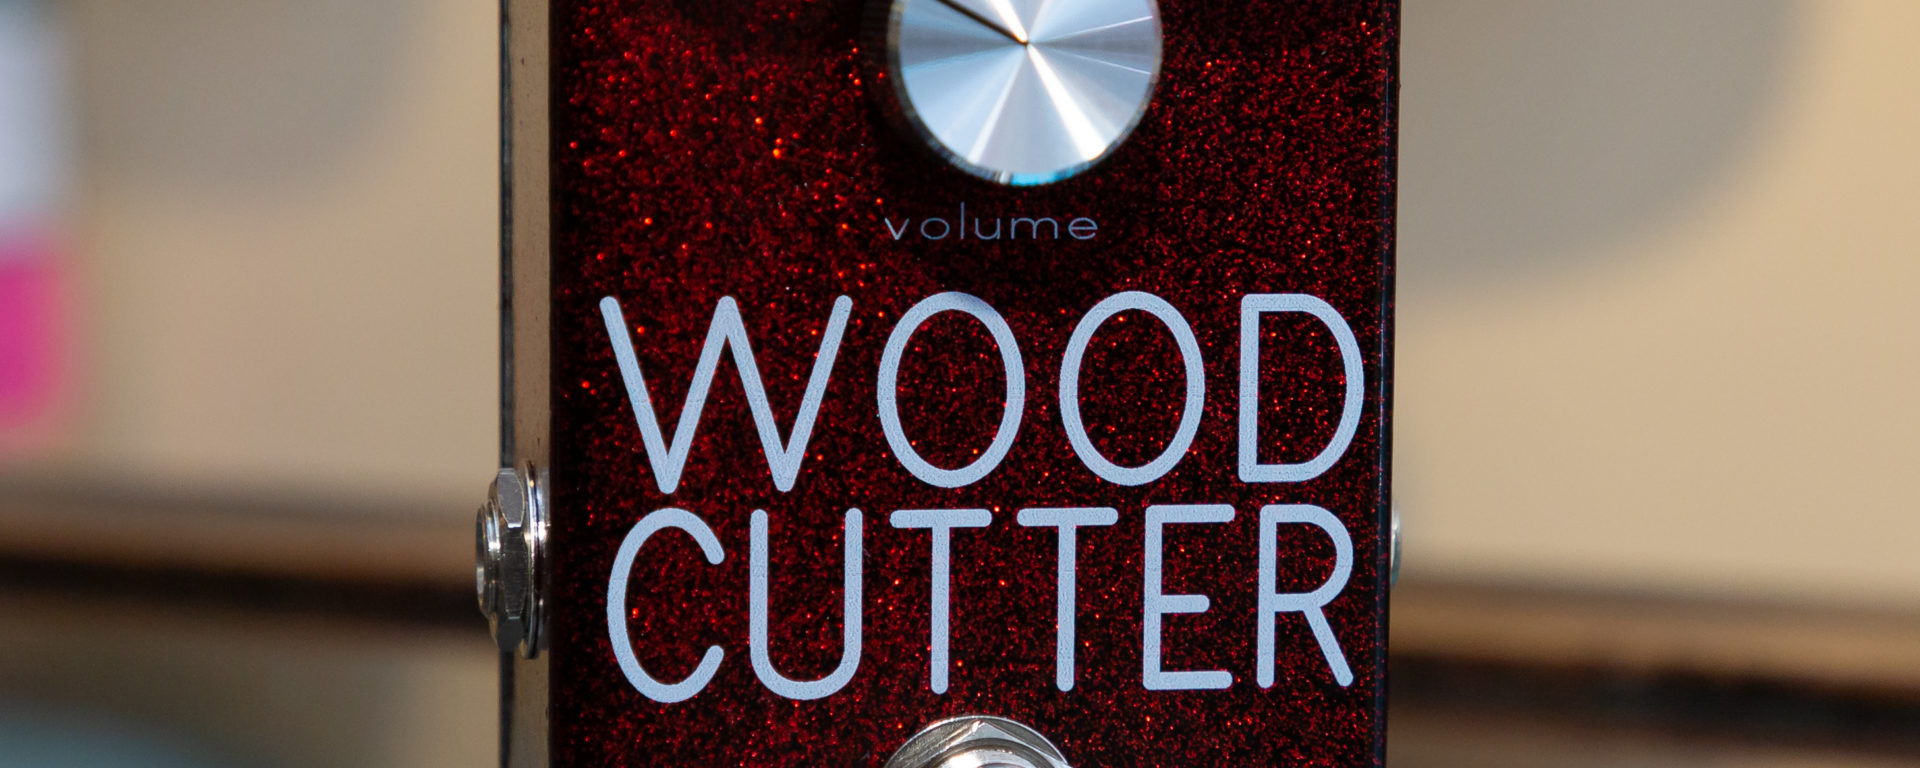 Big Ear Pedals - Woodcutter Rudy Red